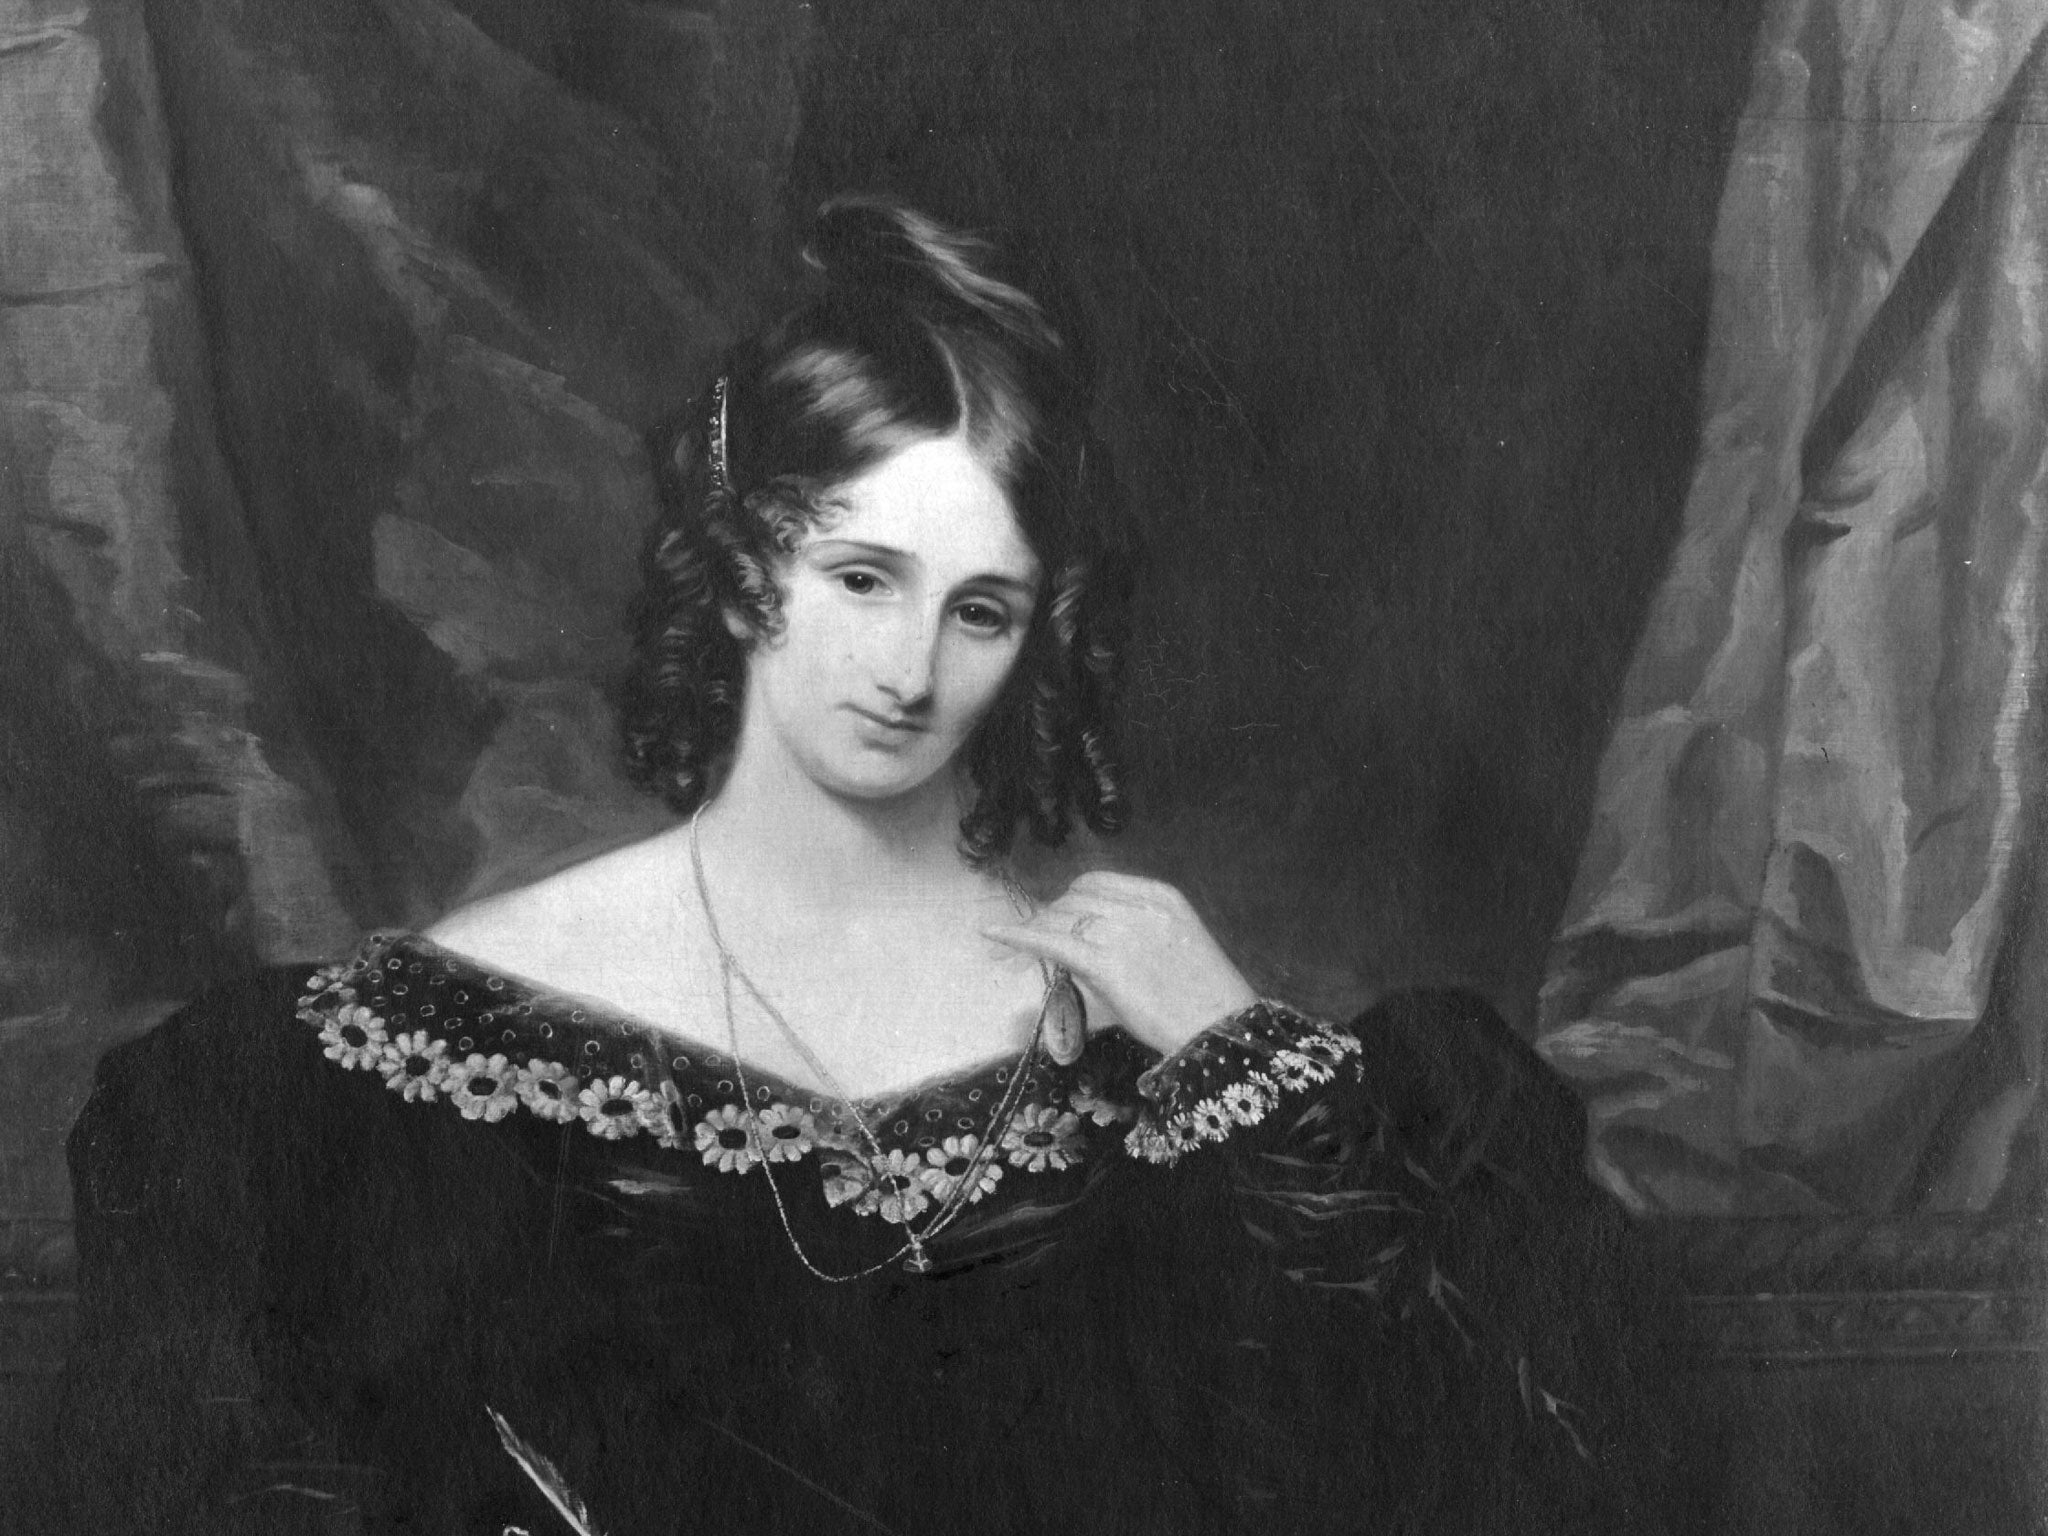 Mary Shelley: Lived according to her mother’s ideals